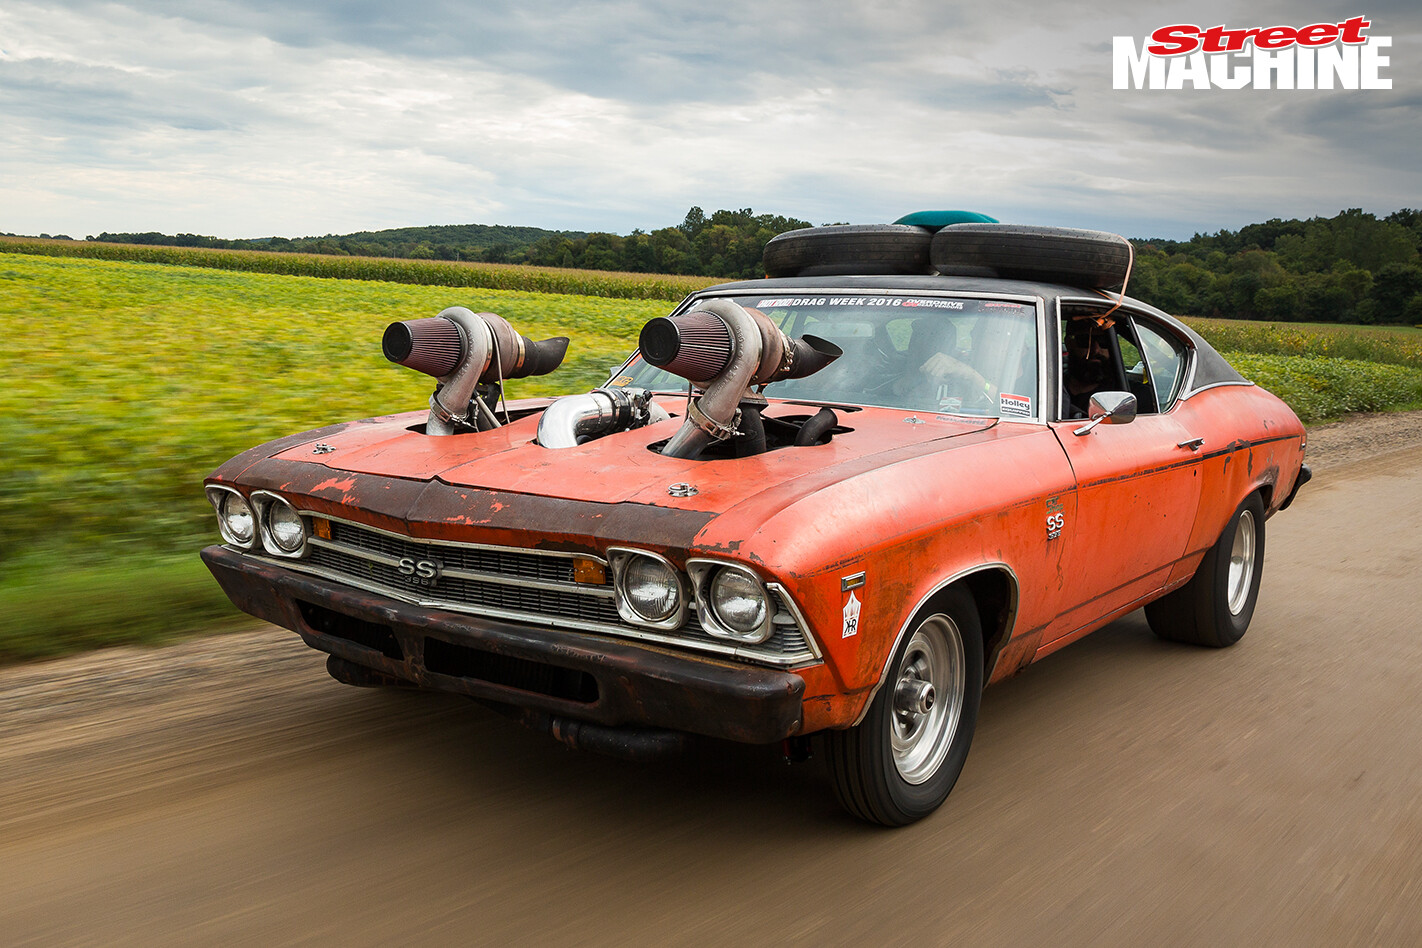 THE STORY OF THE AUSSIE CHEVELLE THAT CONQUERED DRAG WEEK 2016 – VIDEO